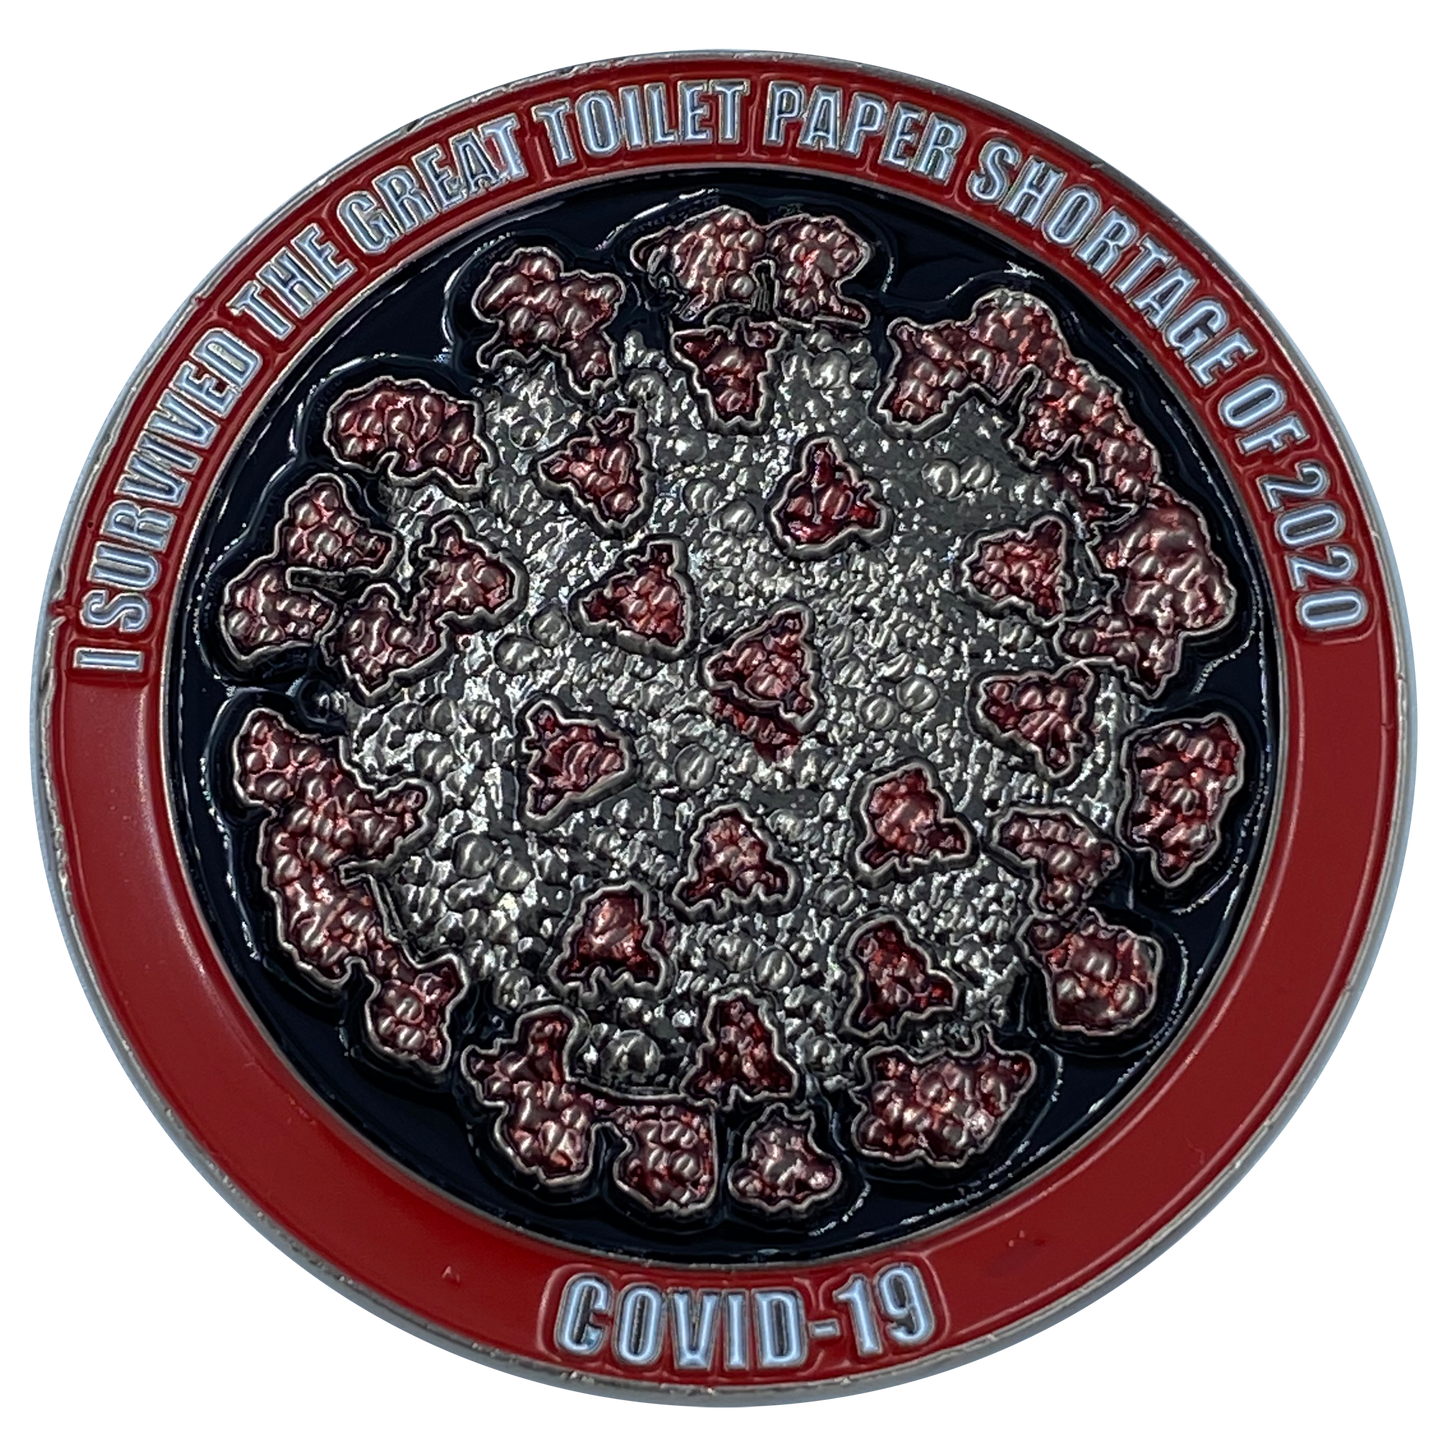 CL-CC I Survived The Great Toilet Paper Shortage of 2020 Challenge Coin